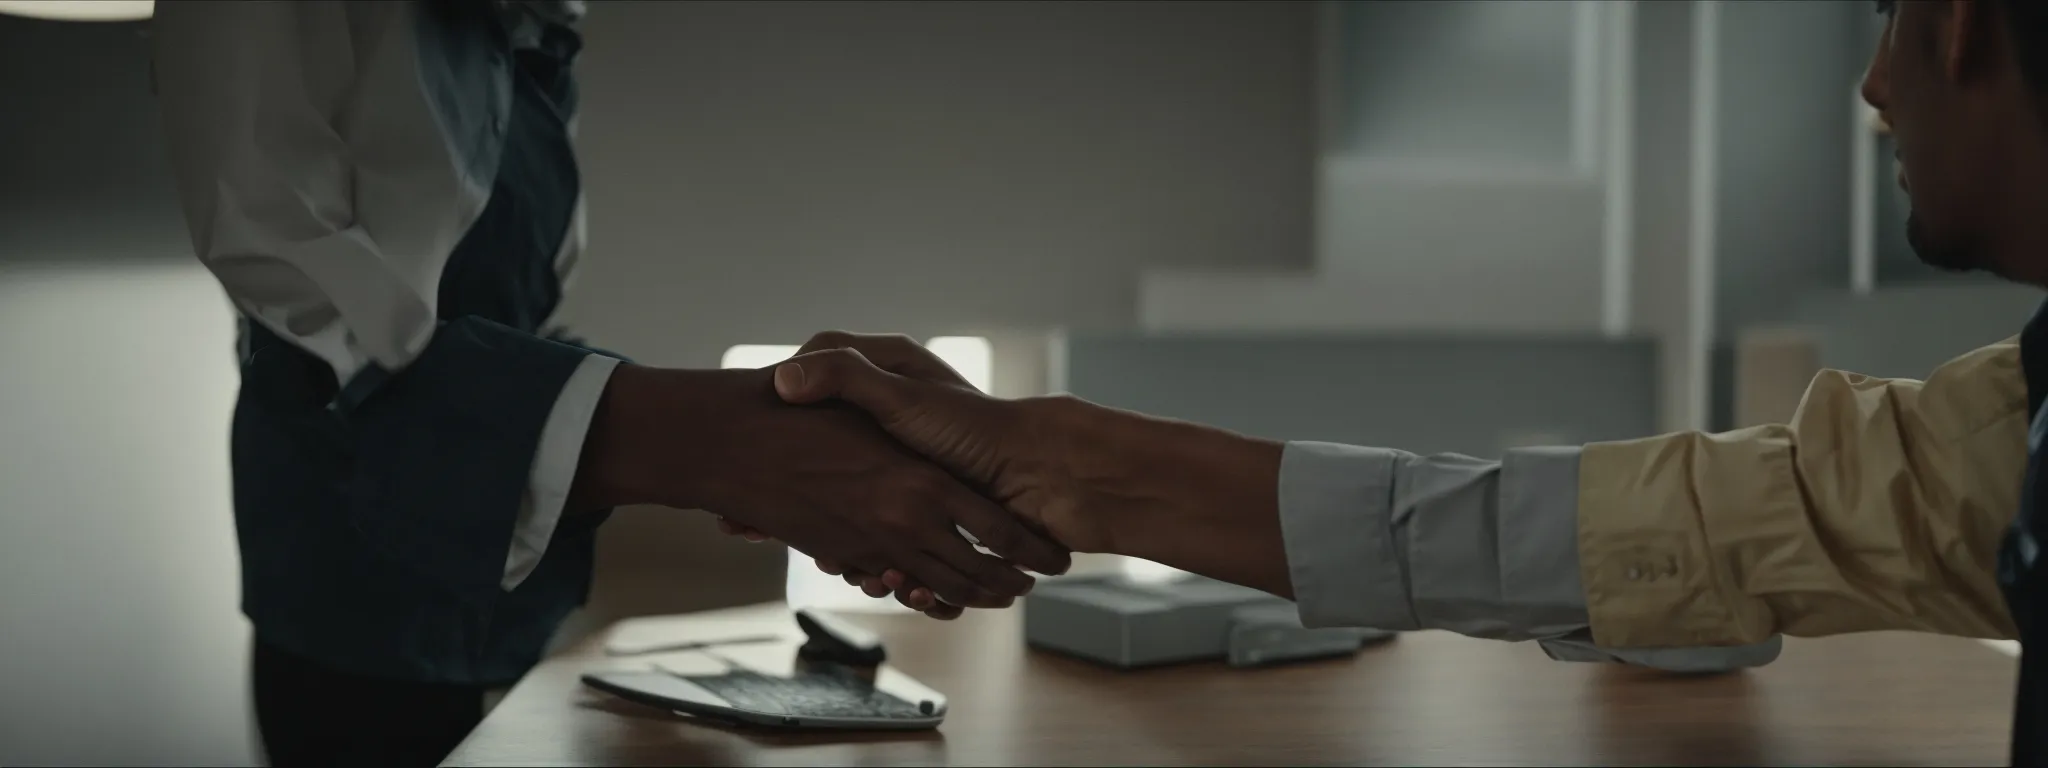 two professionals shaking hands across a table, sealing an seo partnership agreement.